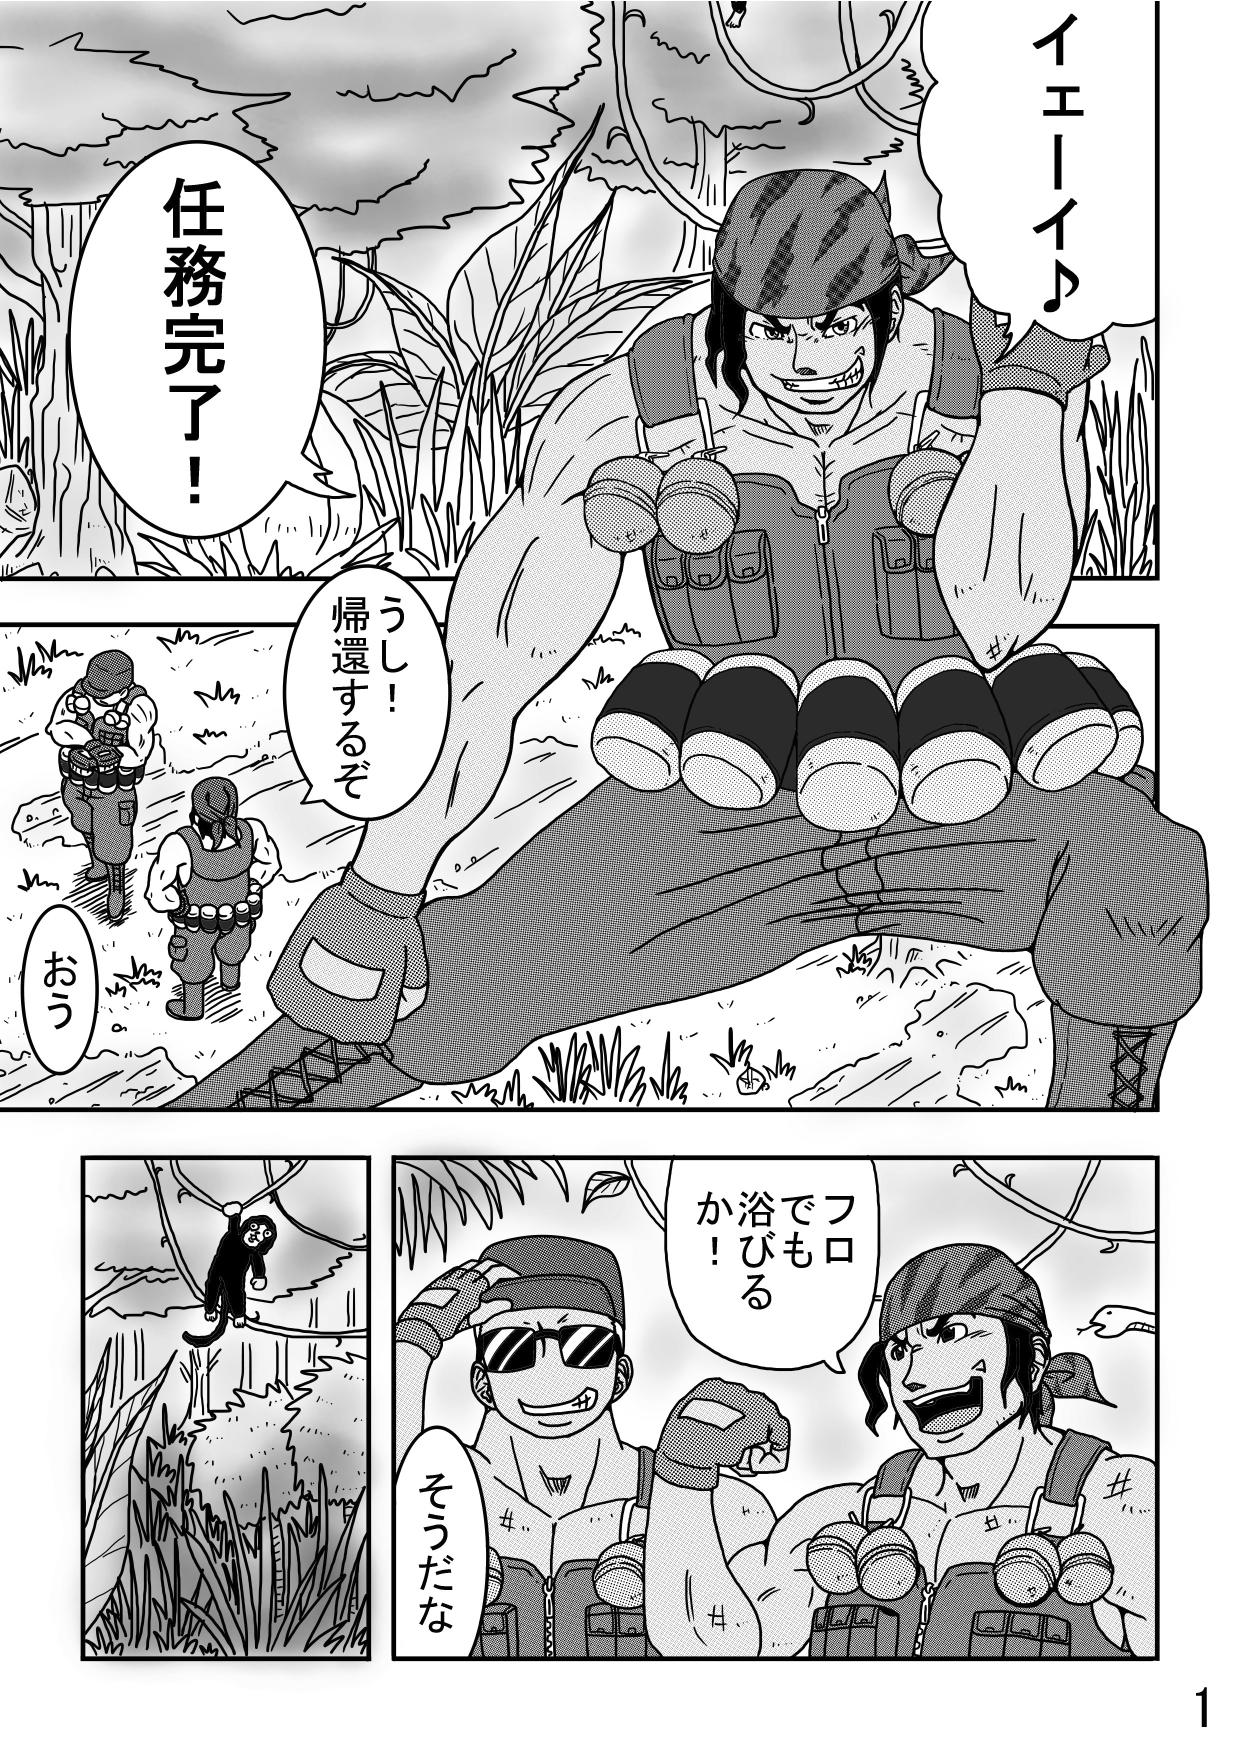 Canadian レオナ風呂 - King of fighters Inked - Page 3